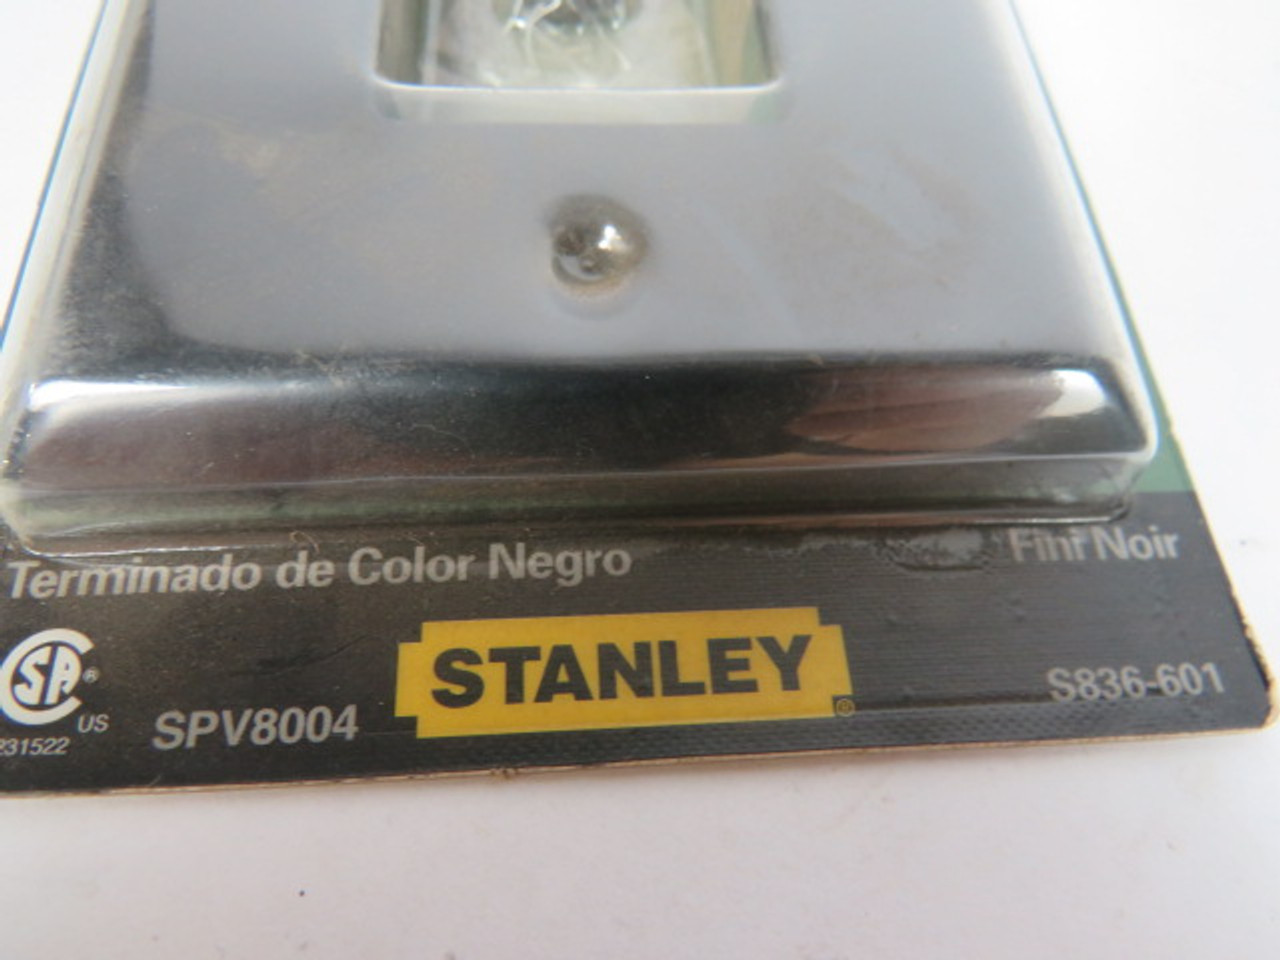 Stanley SPV8004 S836-601 Black Chrome Plated Wall Plate 4-Pack ! NEW !